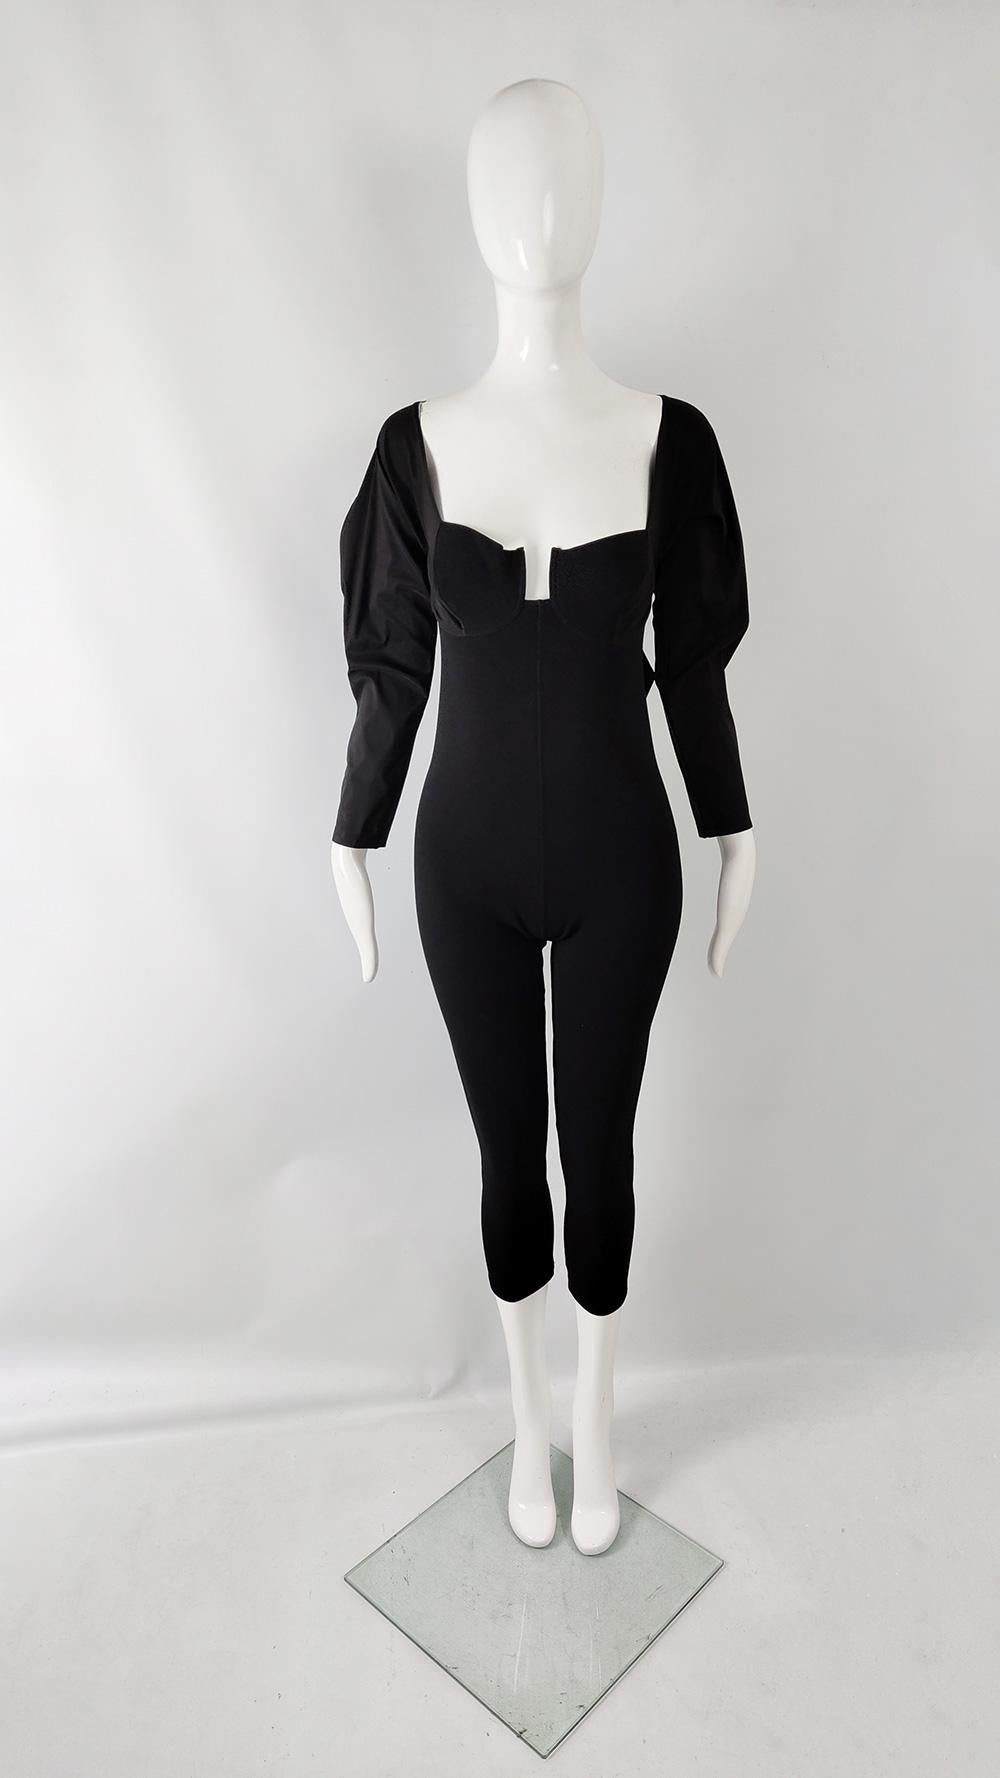 An incredibly sexy vintage womens catsuit from the 90s by luxury French designer, Andrea Templer of Paris. In a black bodycon ribbed fabric with puffed, long sleeves made from taffeta that ties around the back. It has a sculptured bust and a cropped